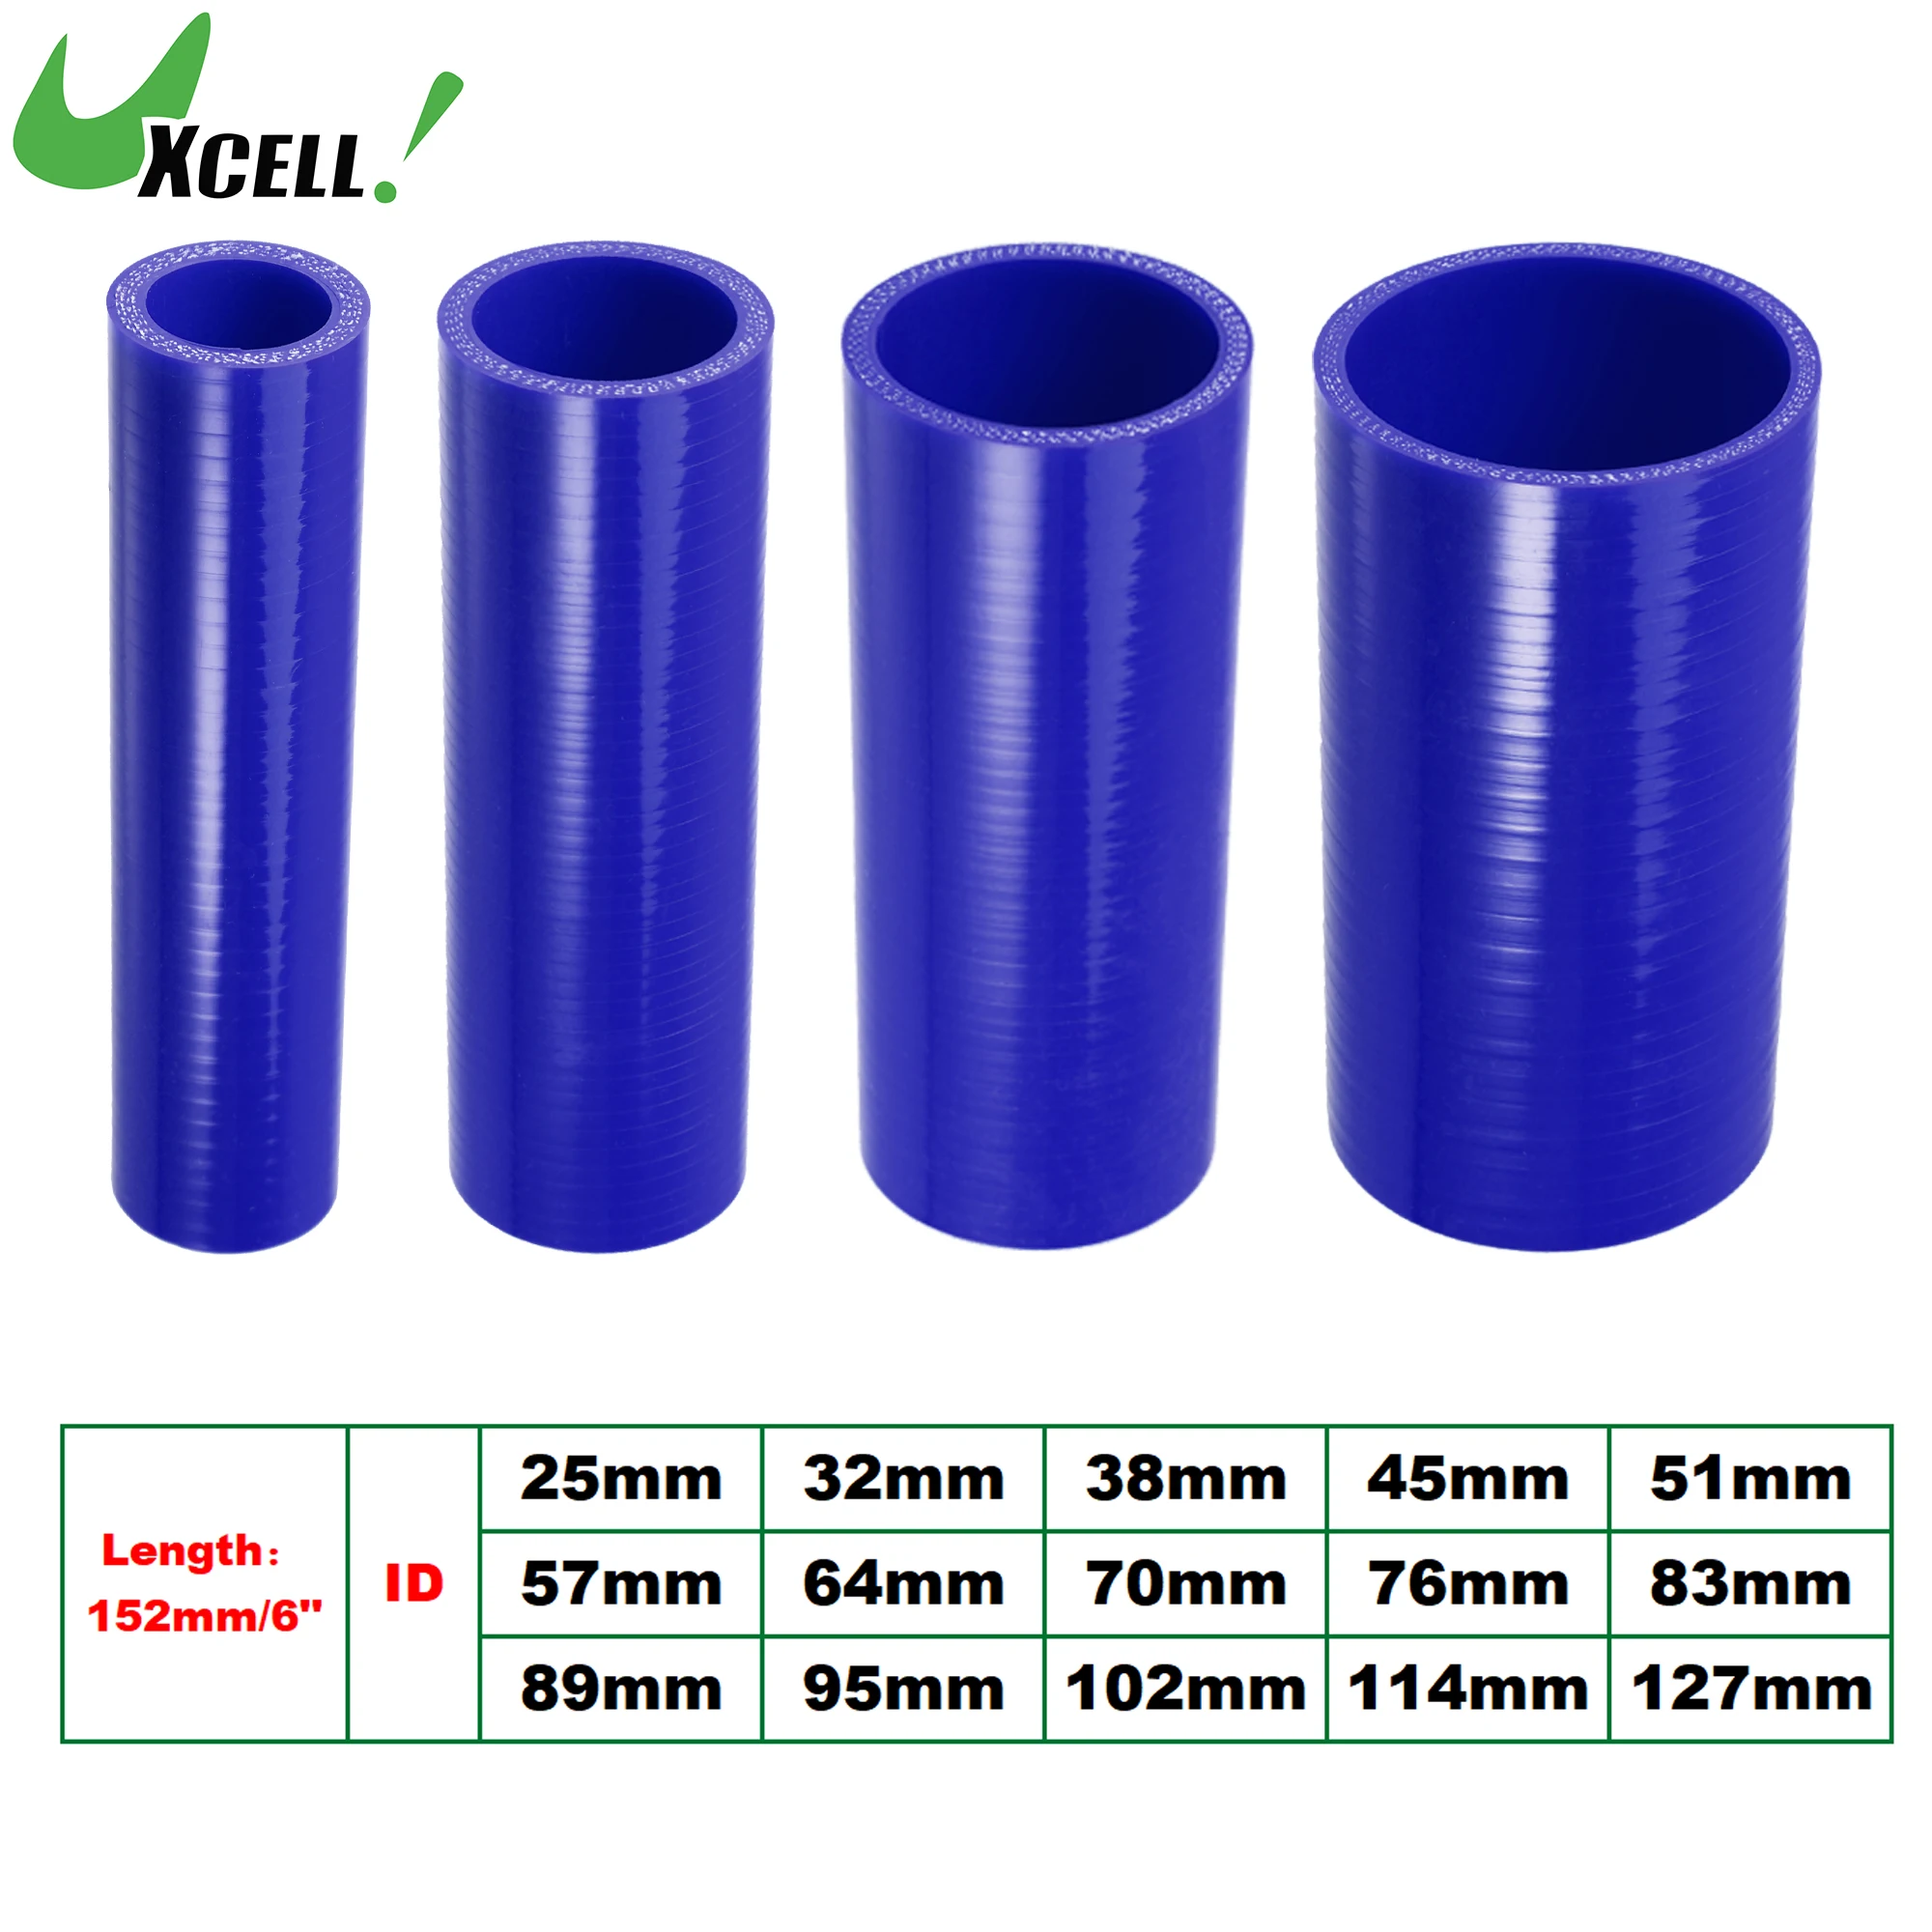 

UXCELL 38mm 51mm 83mm 95mm 114mm ID 152mm Length 4-Ply Reinforced High Temp Straight Coupler Silicone Reducer Hose Blue